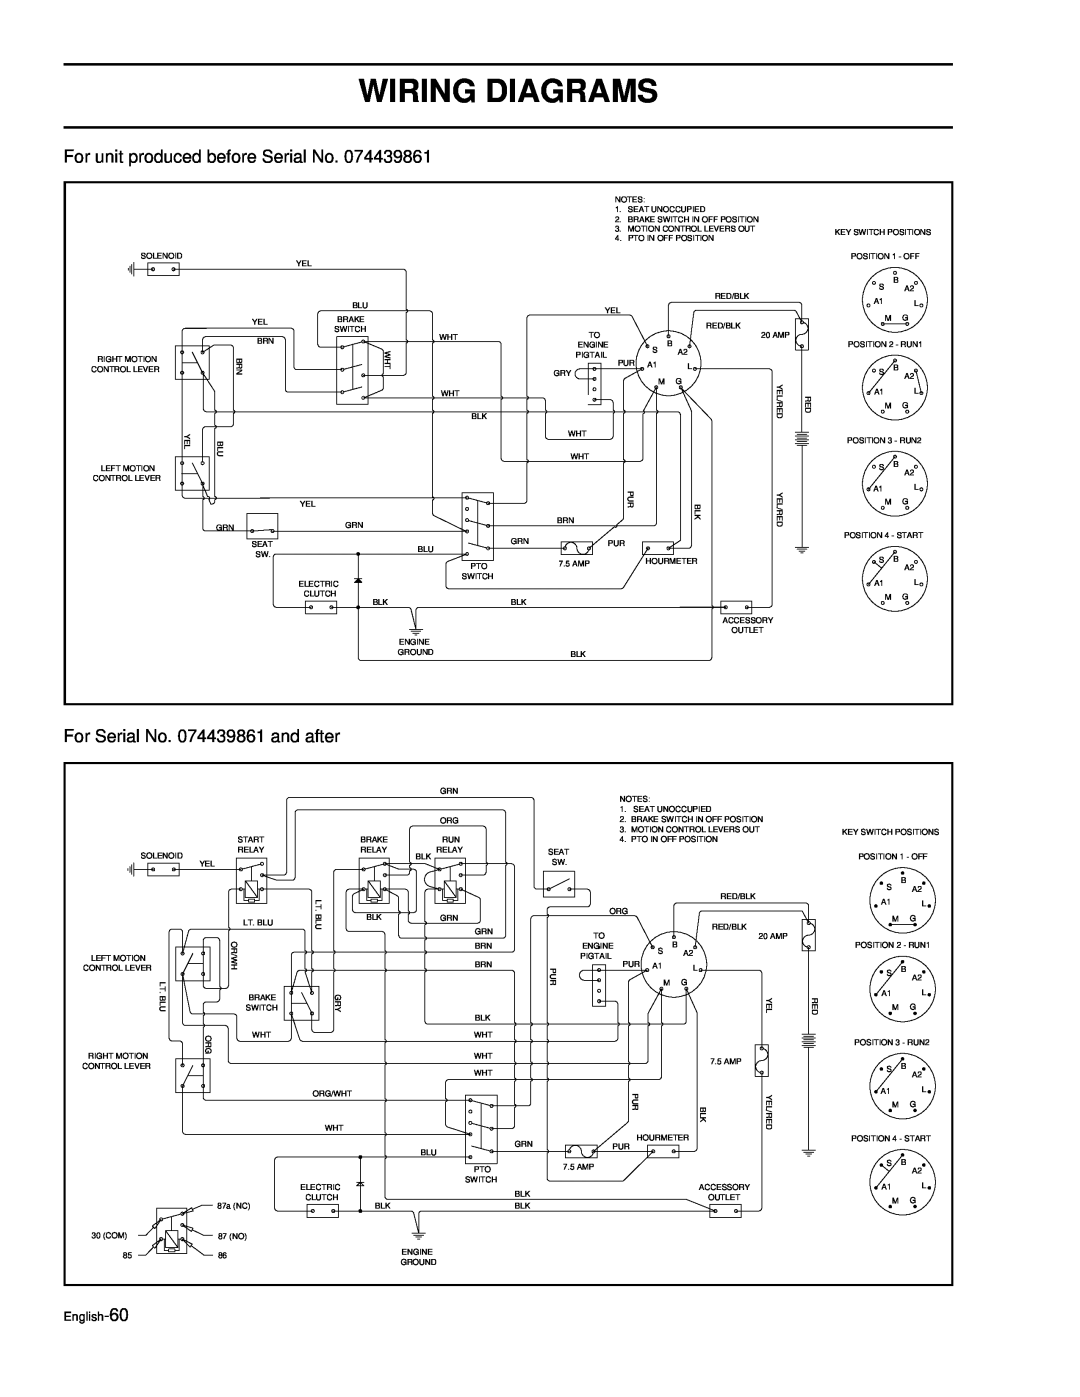 Husqvarna LZ7230, LZ6127 manual Wiring Diagrams, For unit produced before Serial No, For Serial No. 074439861 and after 